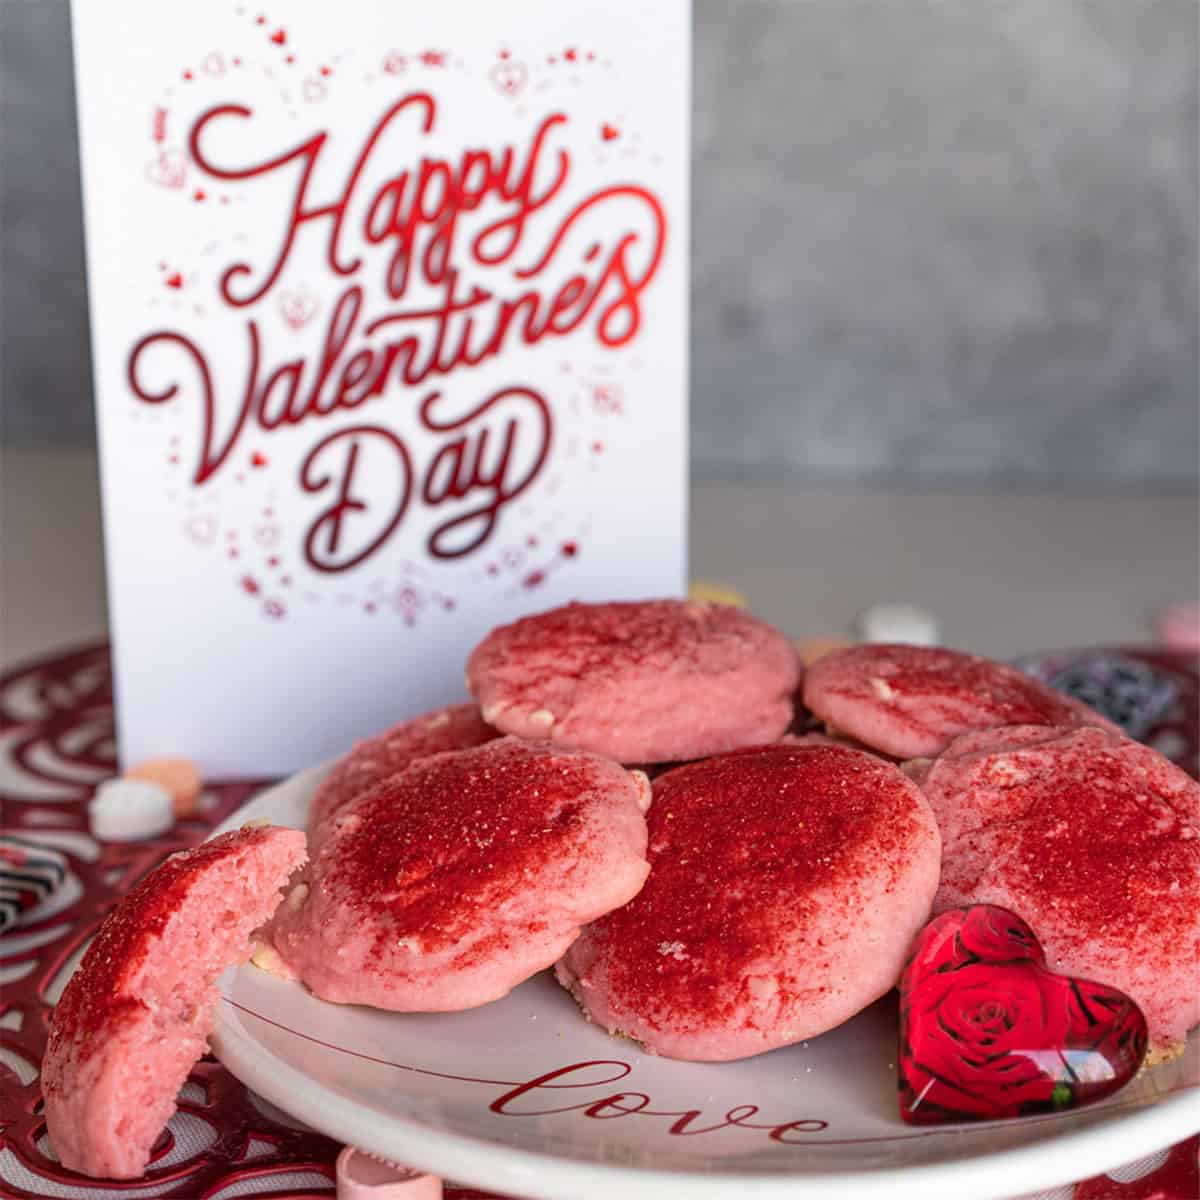 A pink and red strawberry and cream with white chocolate Valentine's Day Cookie on a white plate.